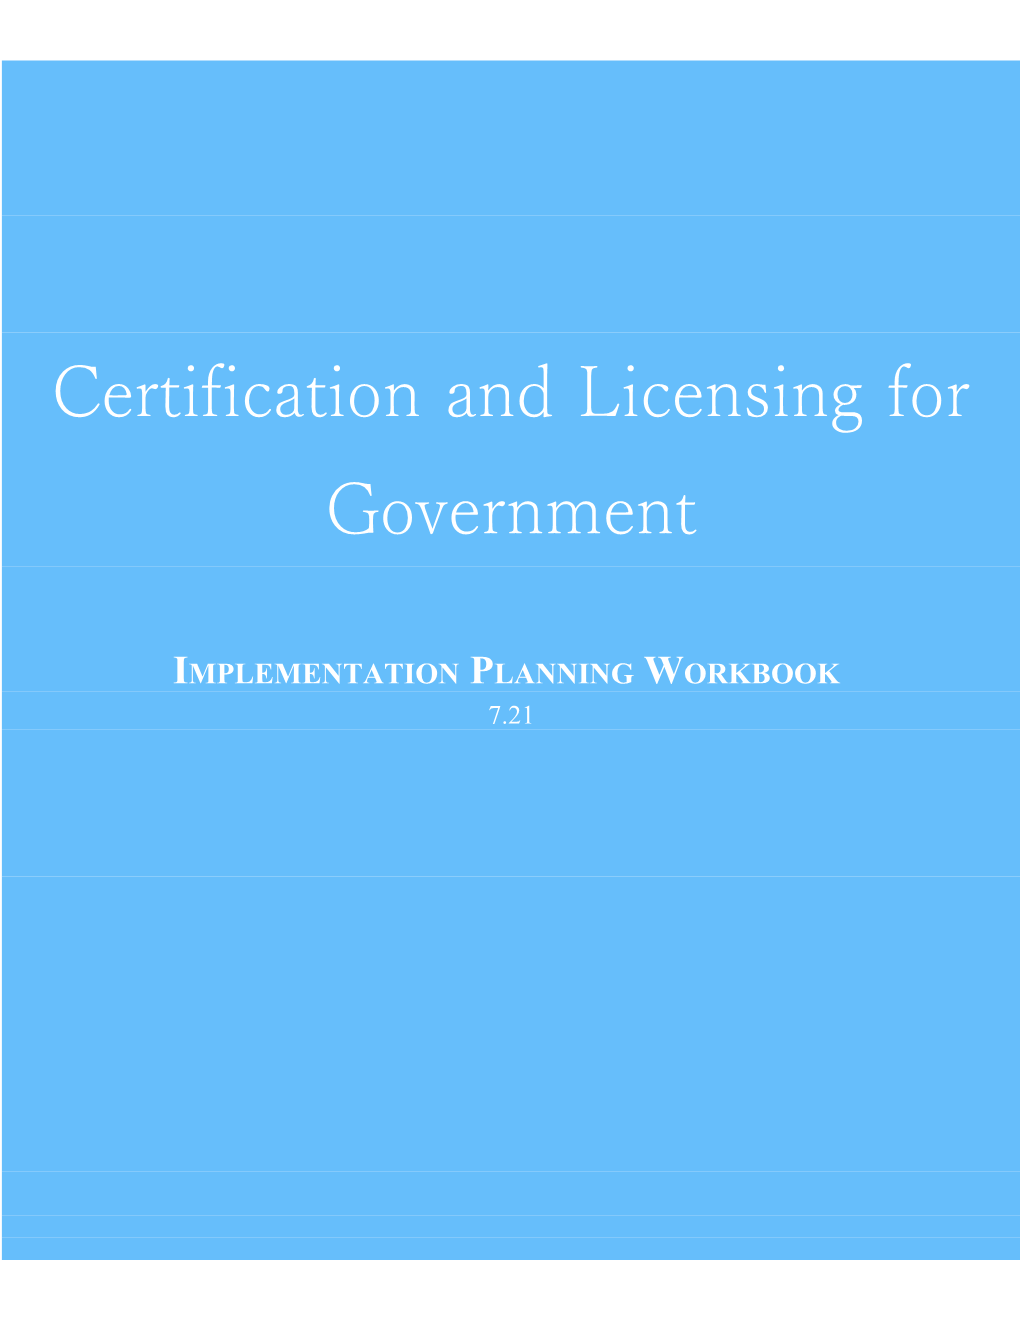 Certification and Licensing for Government